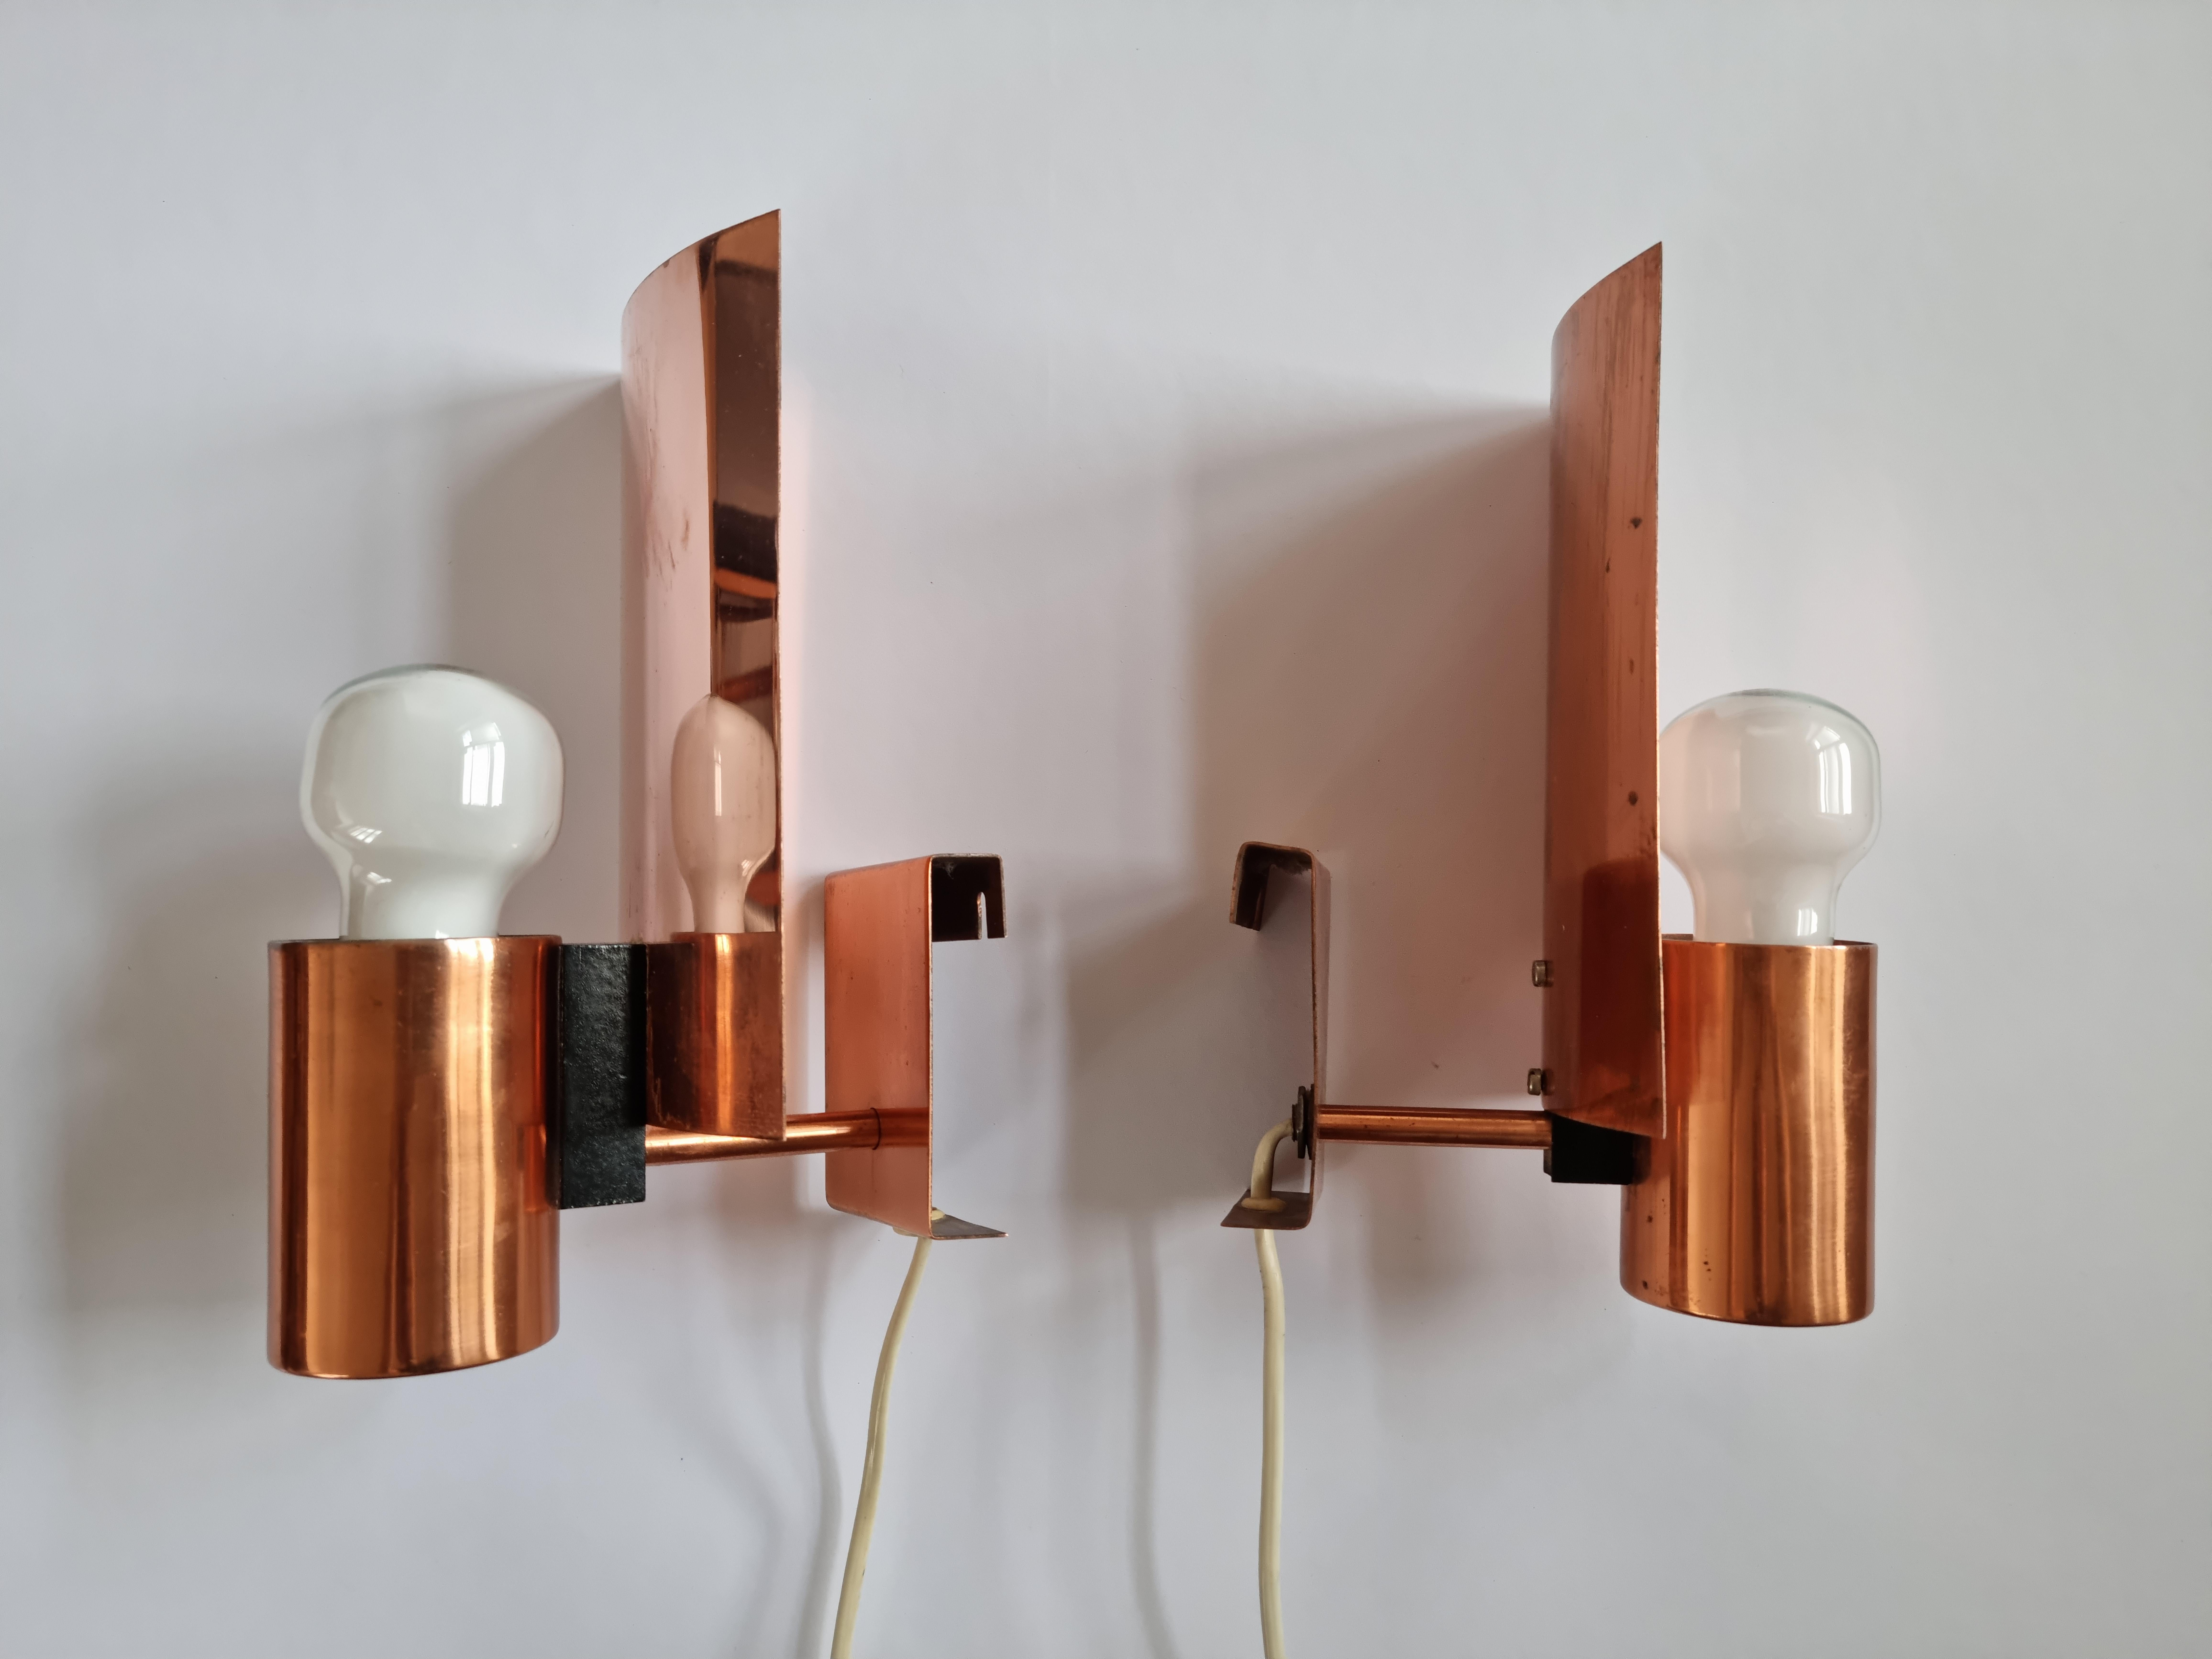 Pair of Midcentury Copper Wall Lamps, Denmark, 1960s For Sale 9